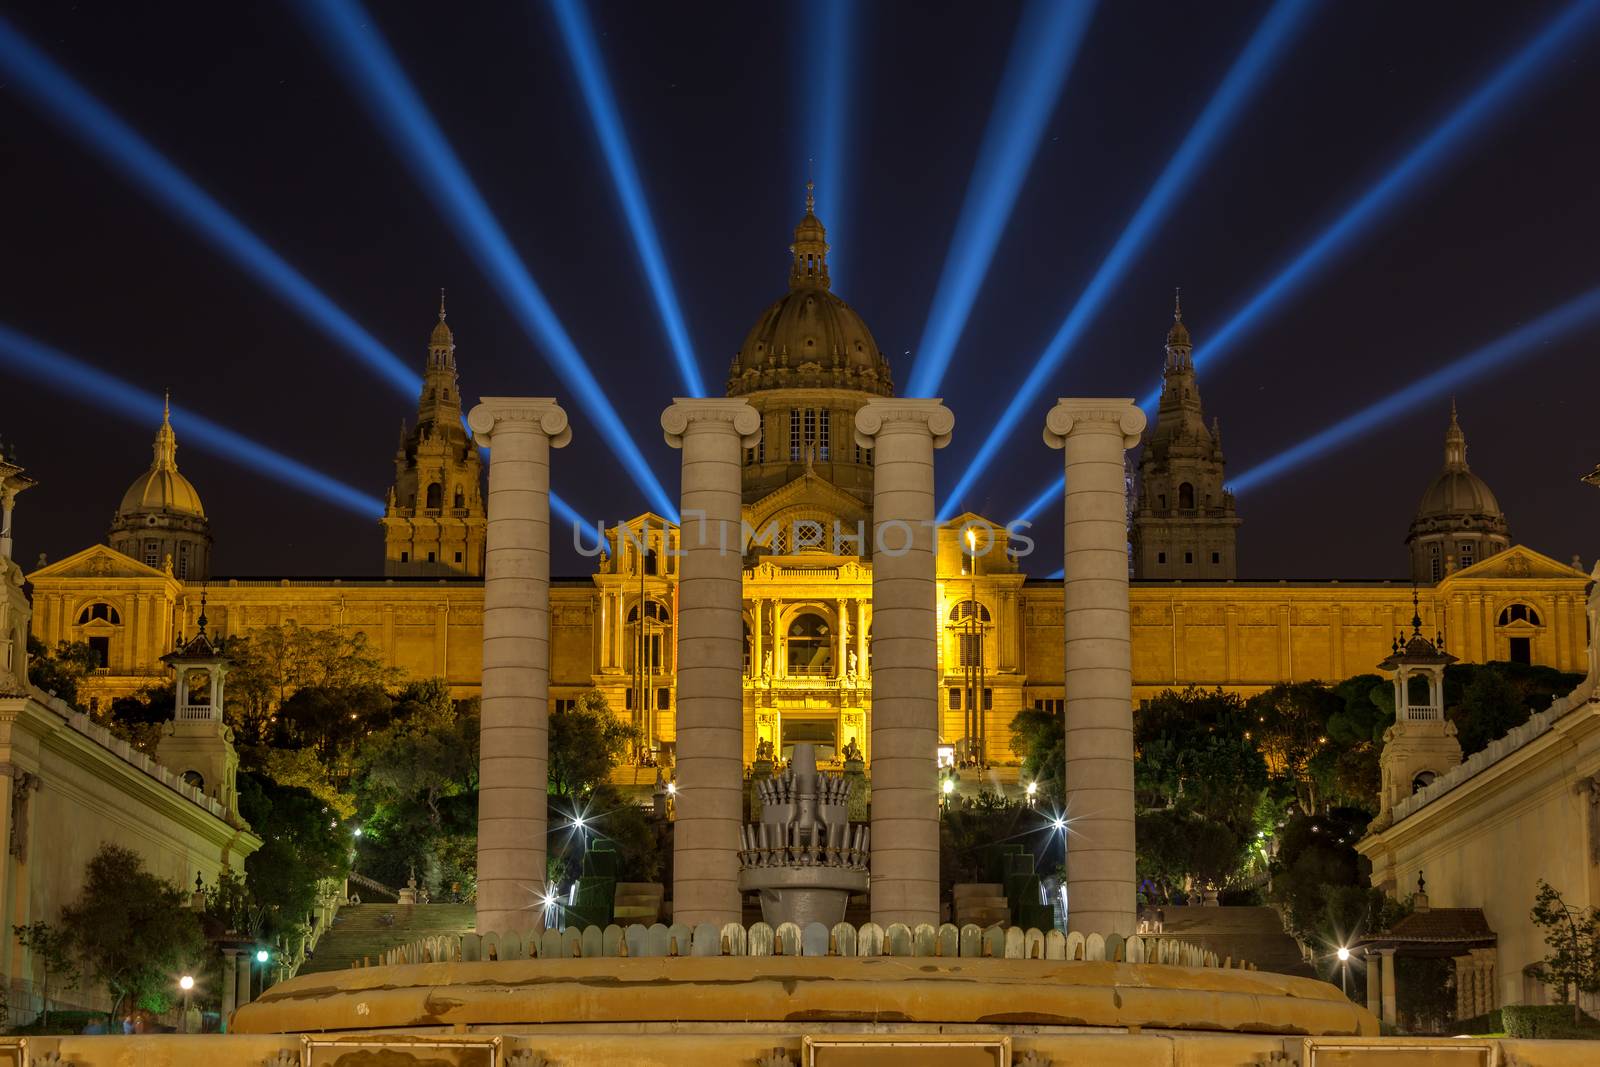 Night view of National Museum in Barcelona, Spain by Digoarpi